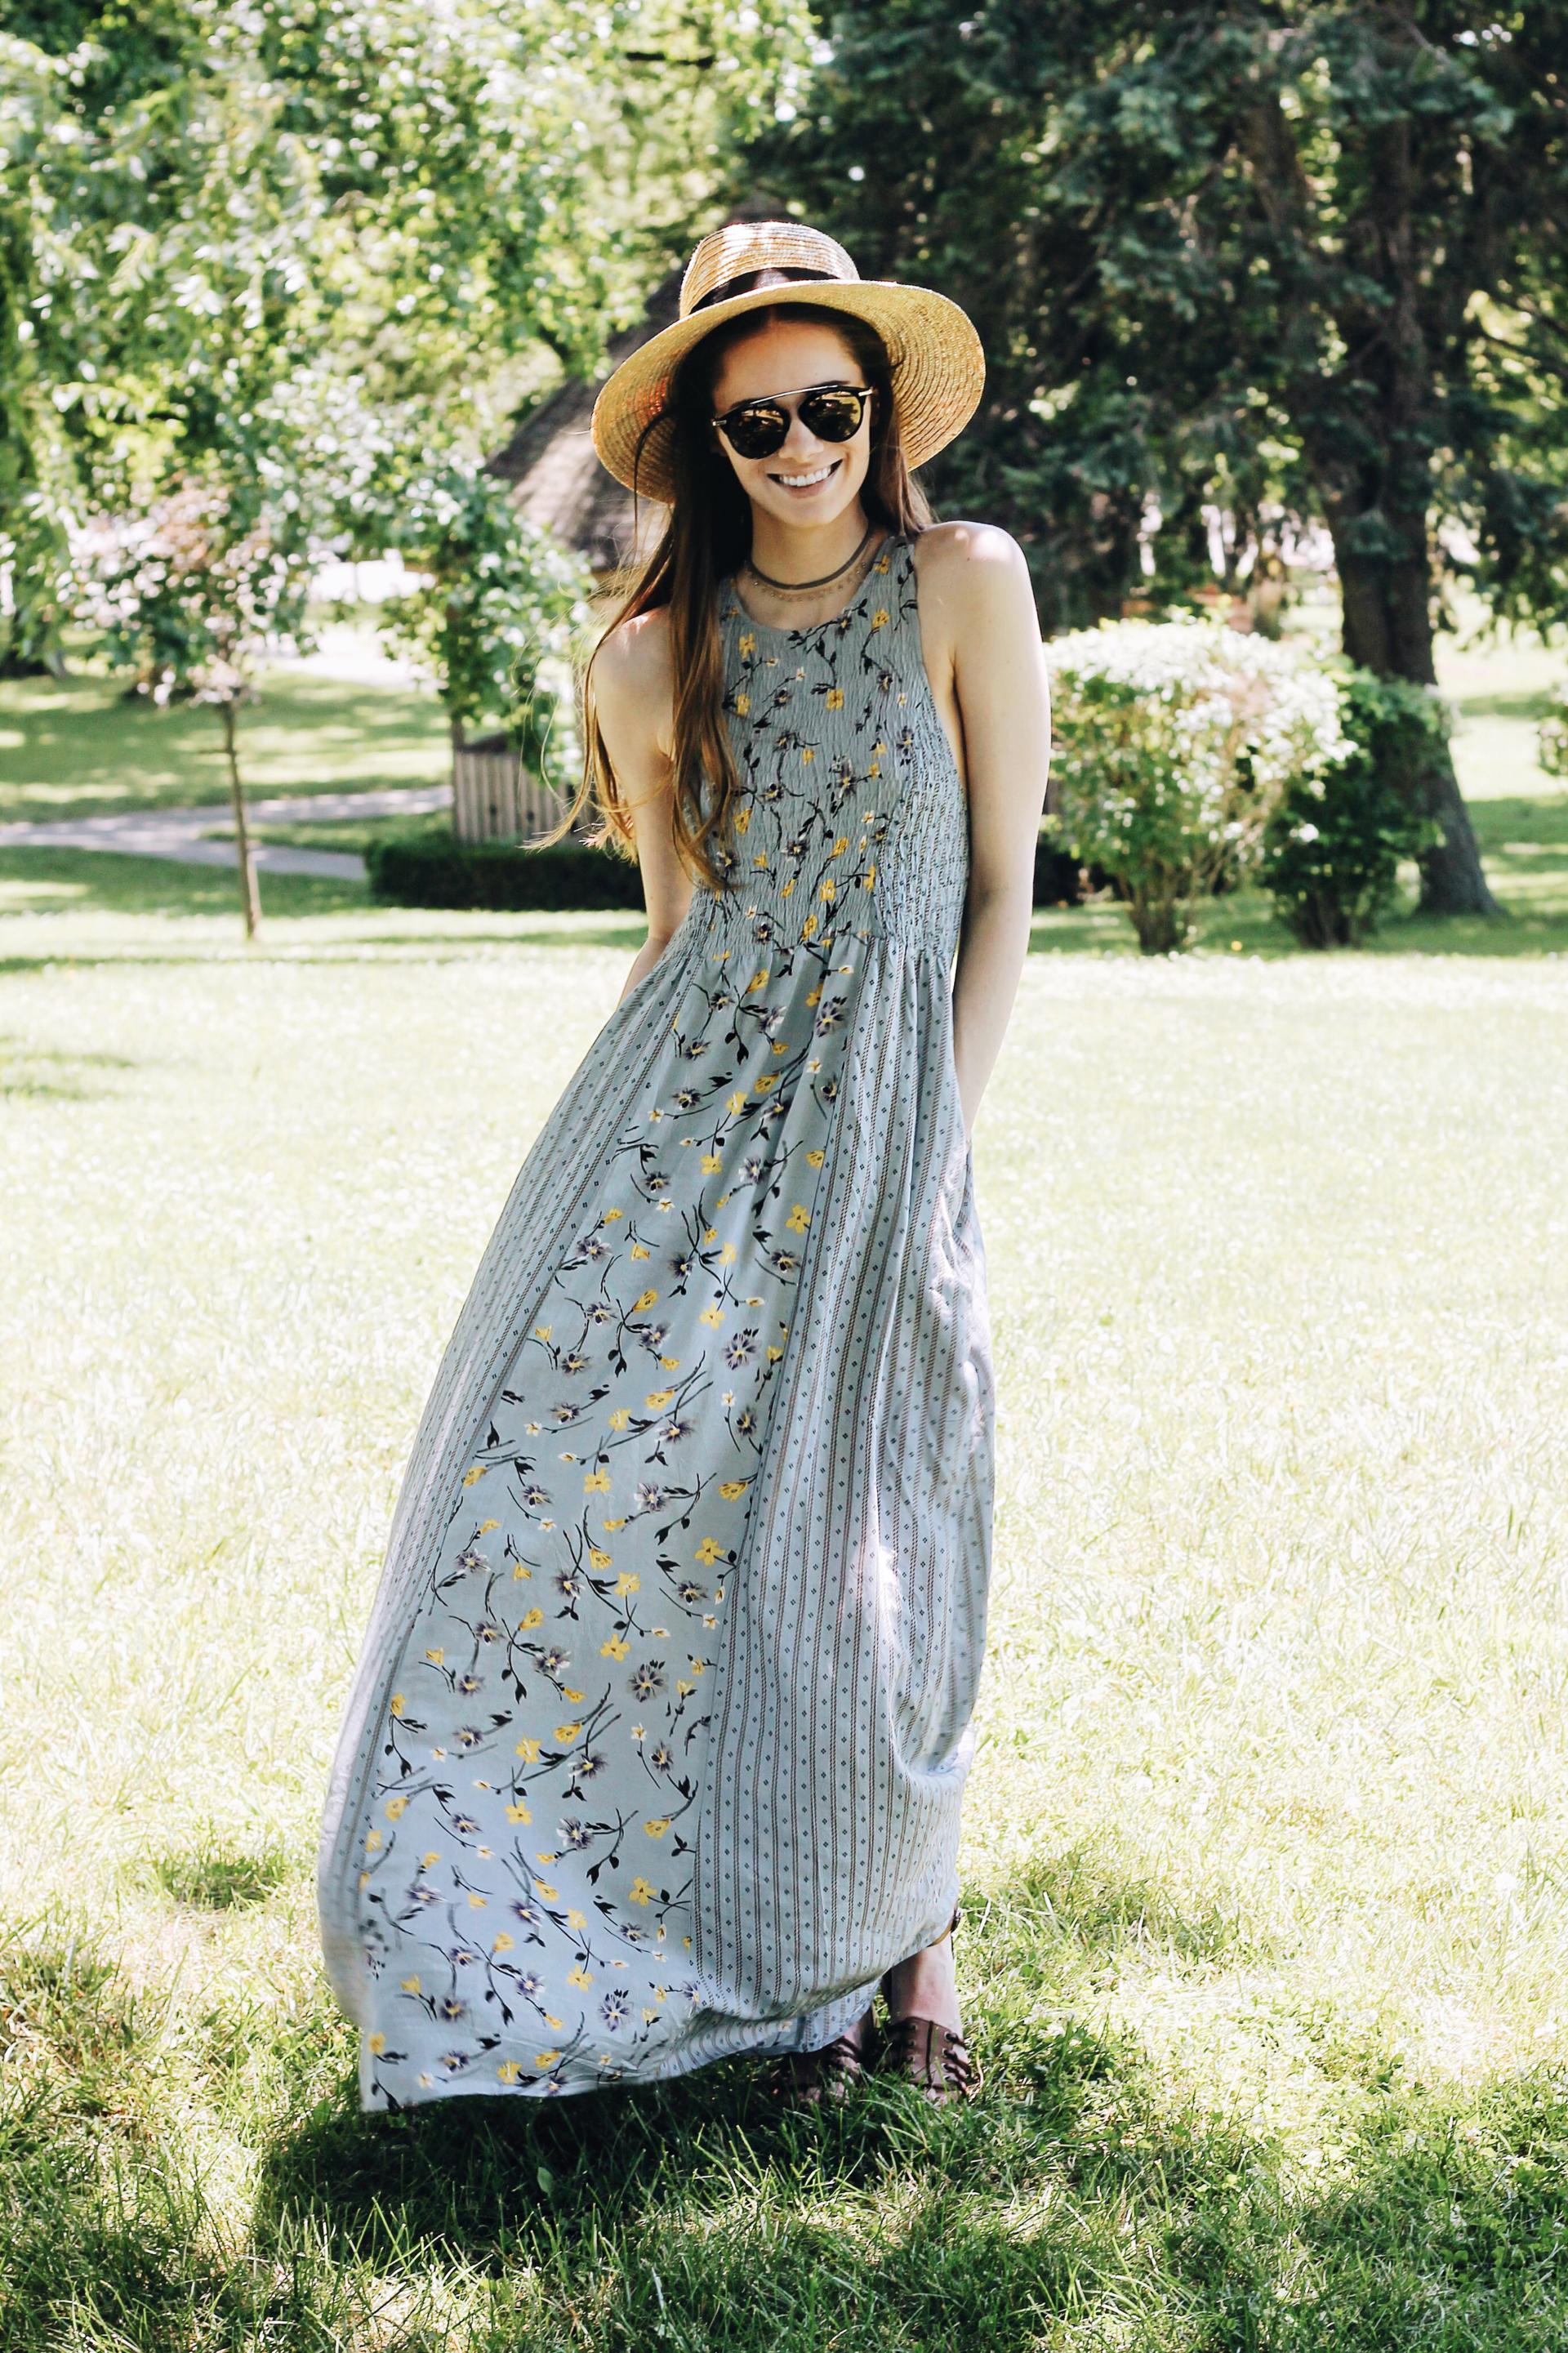 Weekend Picnic + Summer Hat Picks Under $30 - Abby Saylor Armbruster